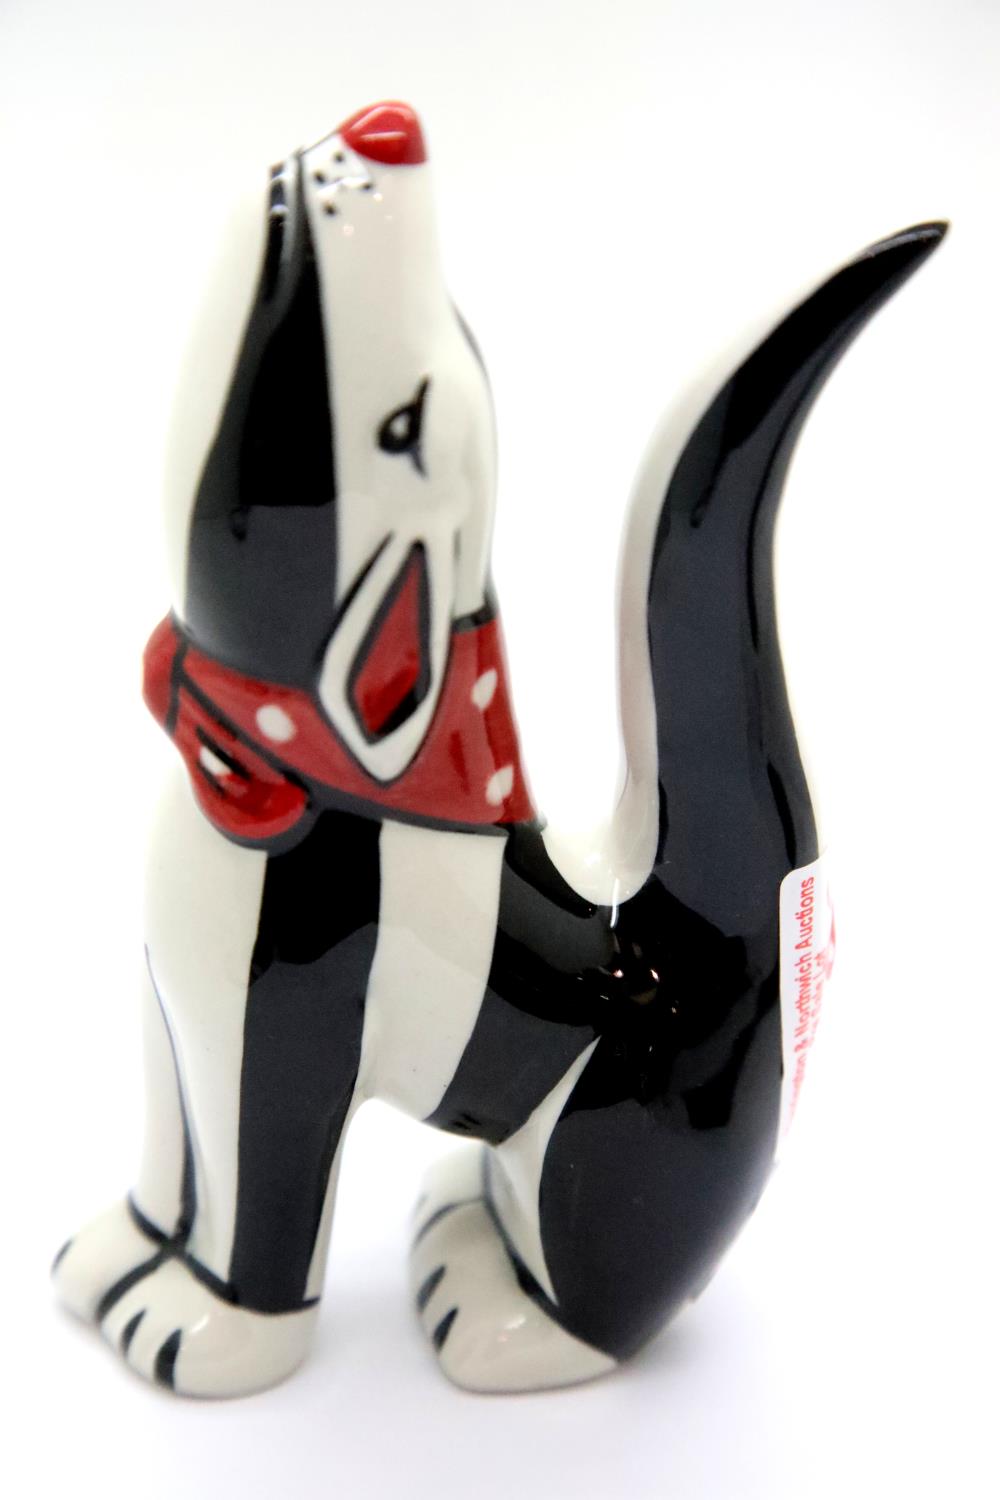 Lorna Bailey Steptoe dog, H: 15 cm. P&P Group 2 (£18+VAT for the first lot and £3+VAT for subsequent